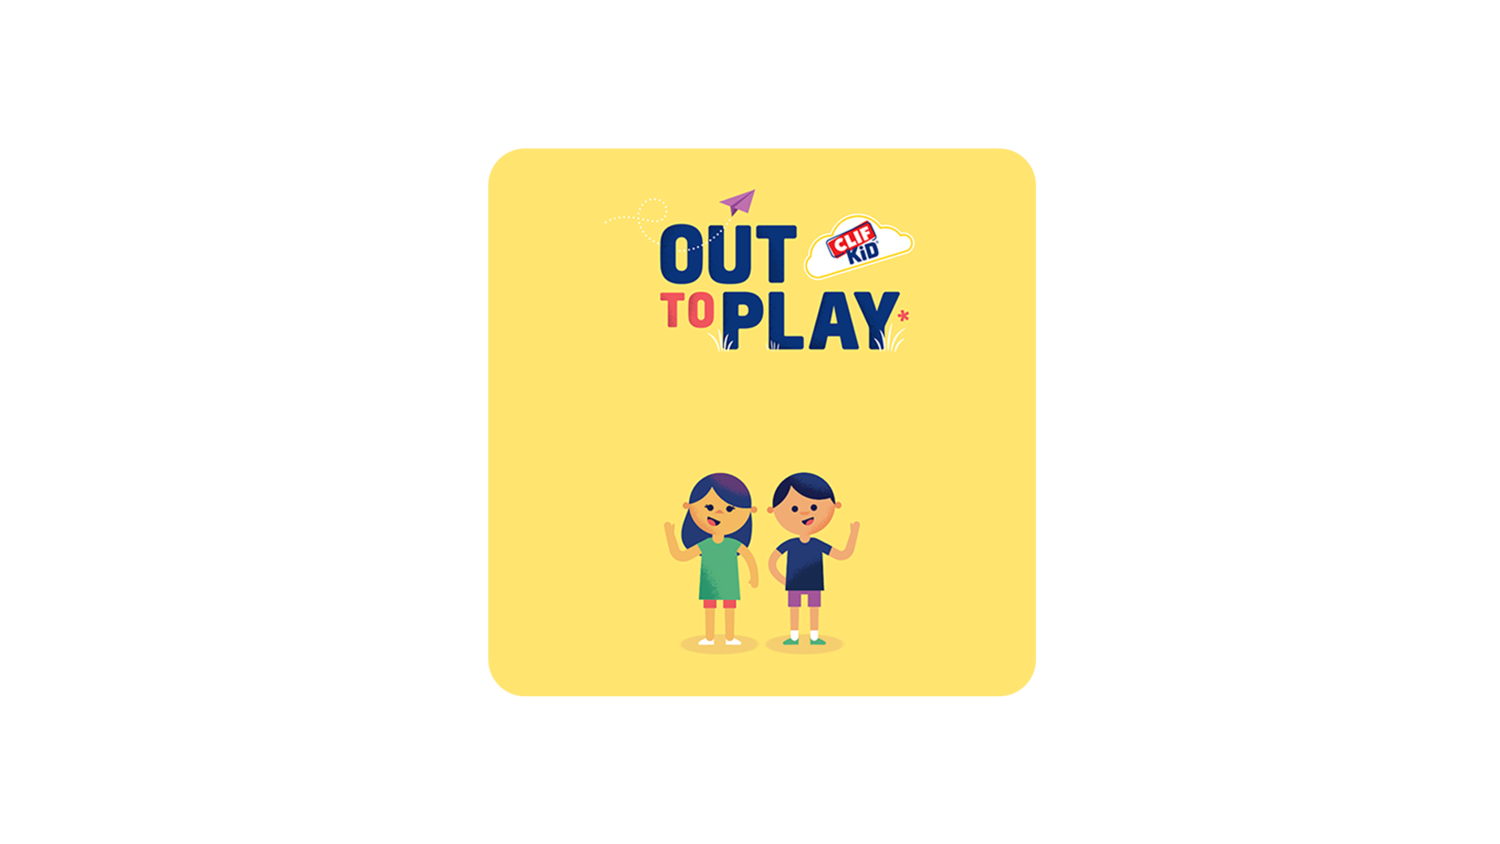 CLIF Kid: Out to Play — Hi. I'm Mike